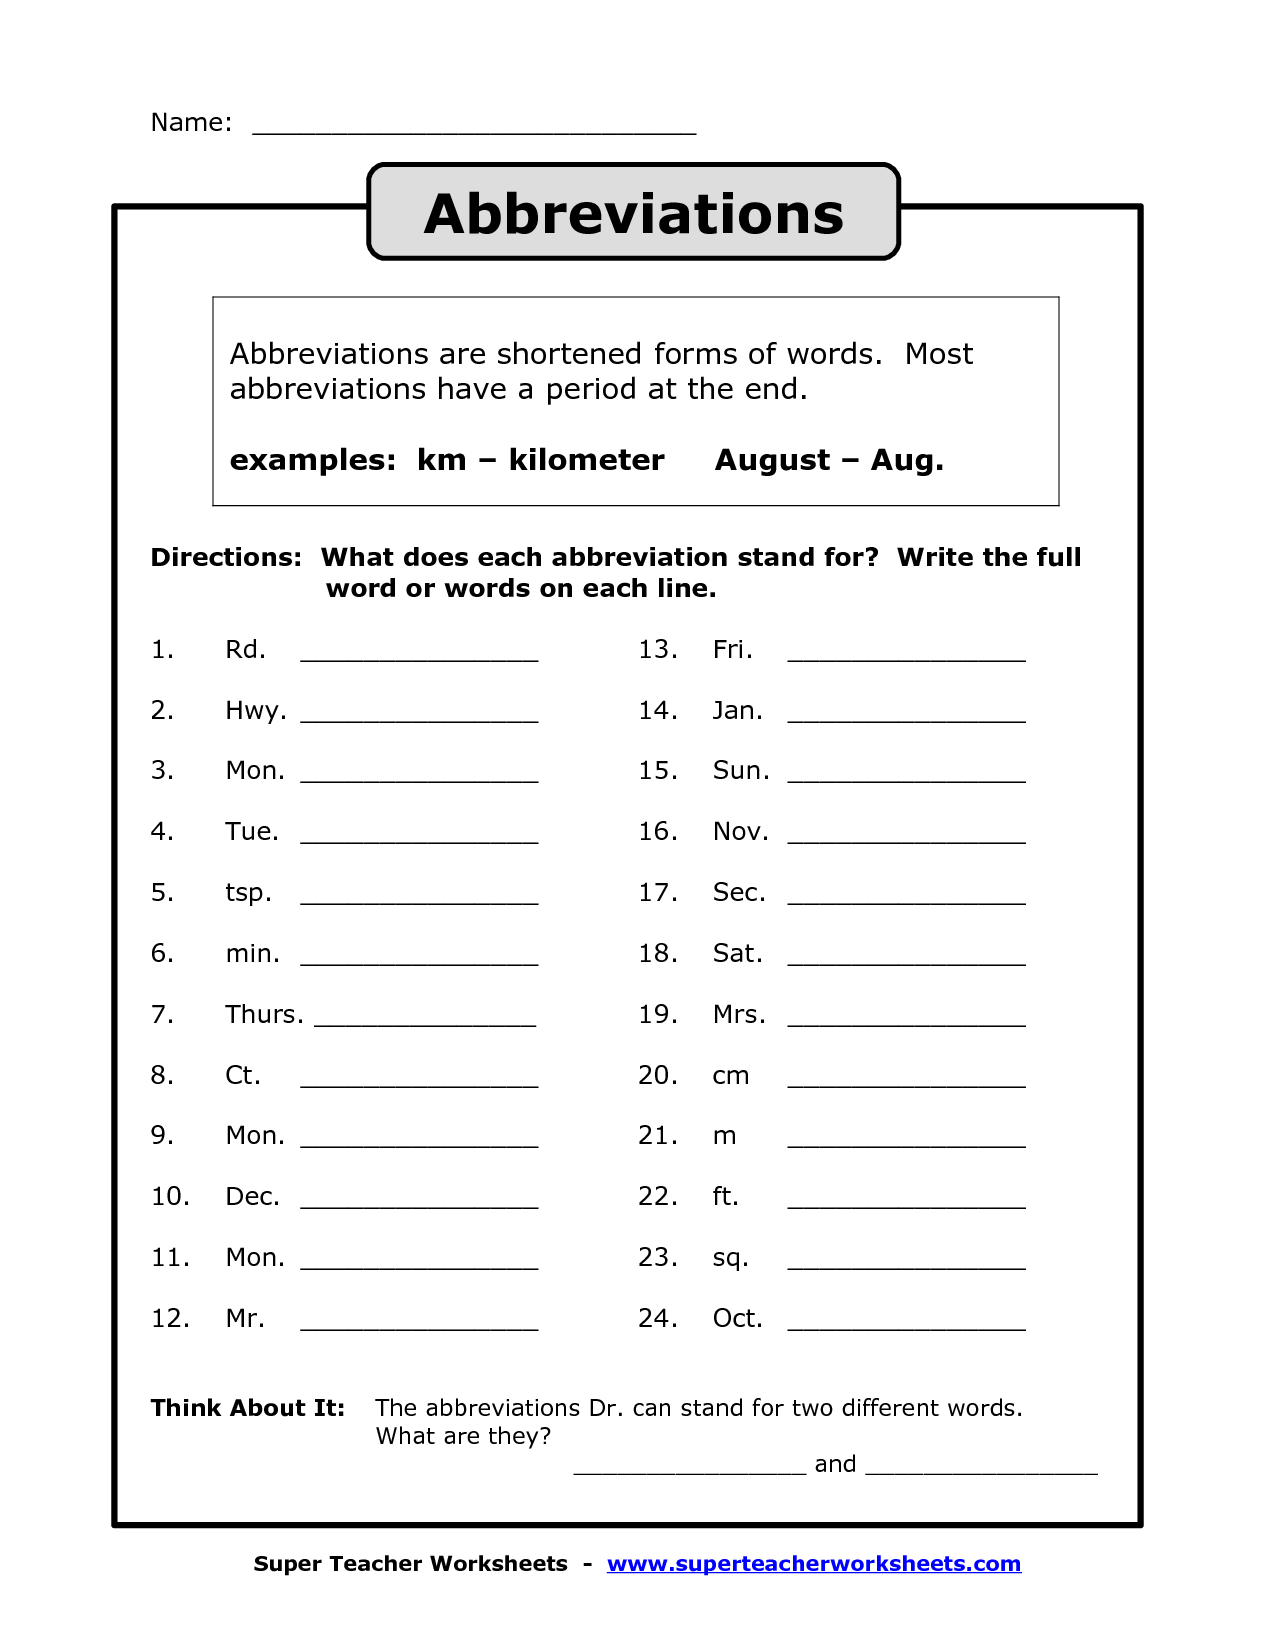 State Names and Abbreviations Worksheet Image